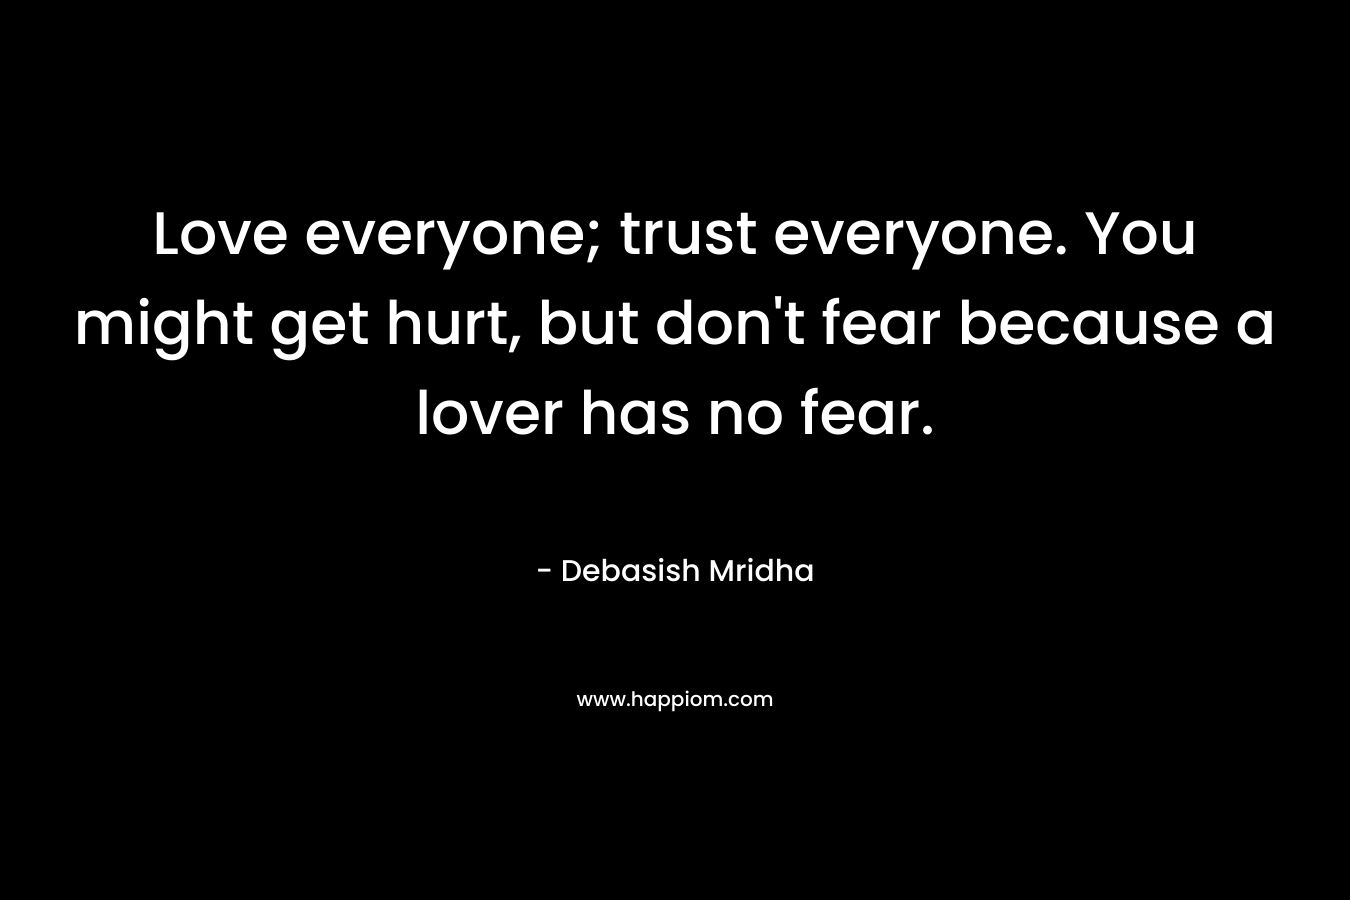 Love everyone; trust everyone. You might get hurt, but don't fear because a lover has no fear.